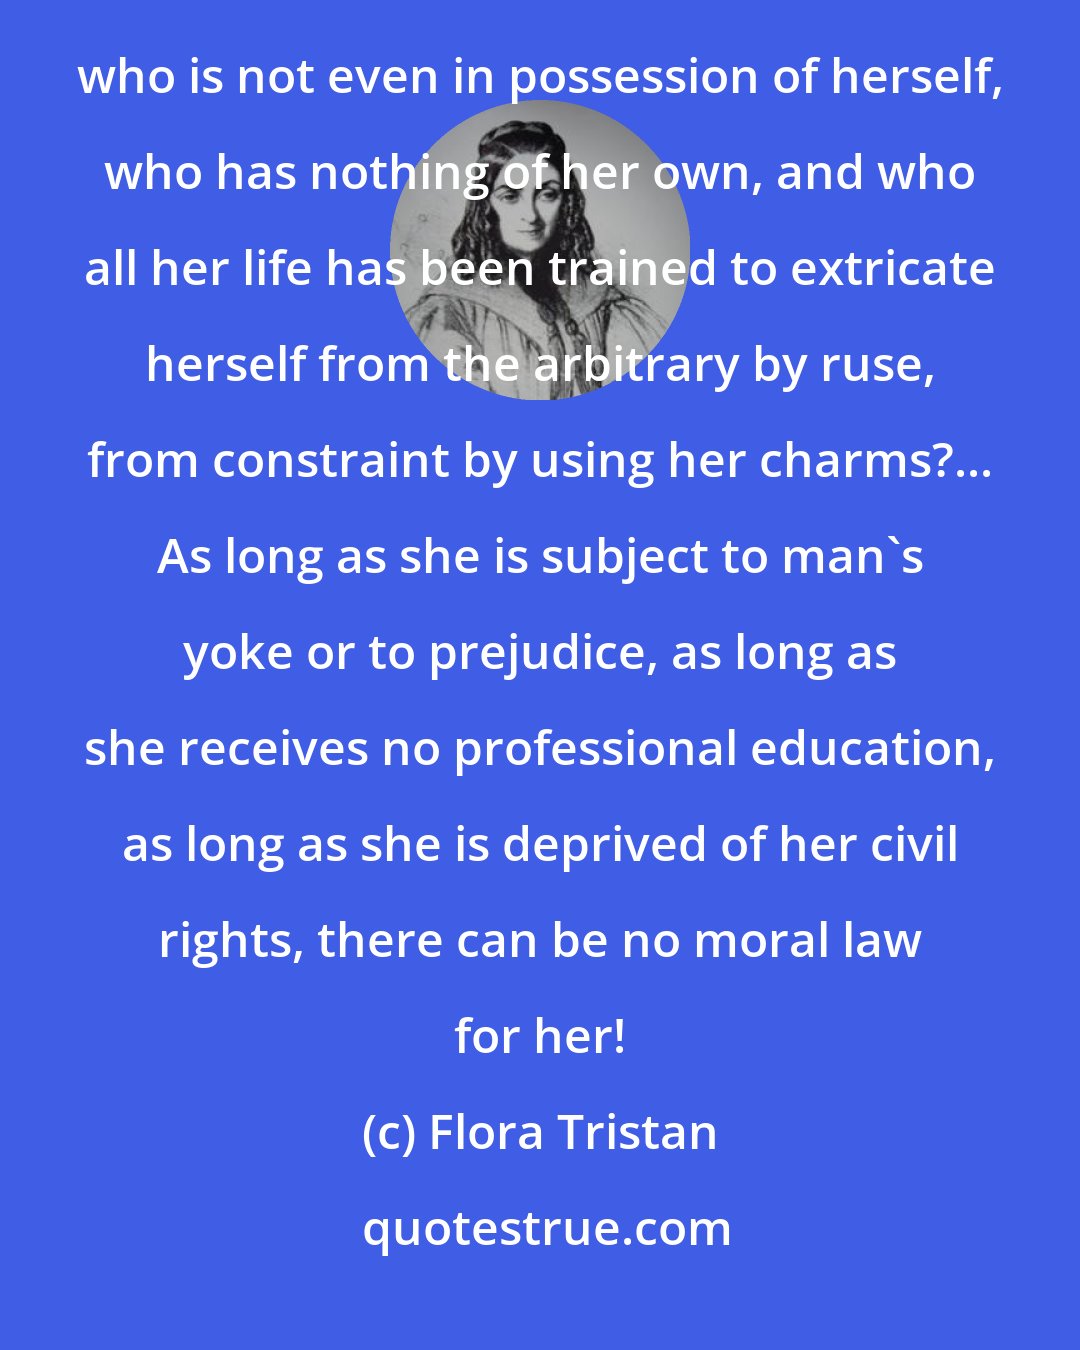 Flora Tristan: Virtue and vice suppose the freedom to choose between good and evil; but what can be the morals of a woman who is not even in possession of herself, who has nothing of her own, and who all her life has been trained to extricate herself from the arbitrary by ruse, from constraint by using her charms?... As long as she is subject to man's yoke or to prejudice, as long as she receives no professional education, as long as she is deprived of her civil rights, there can be no moral law for her!